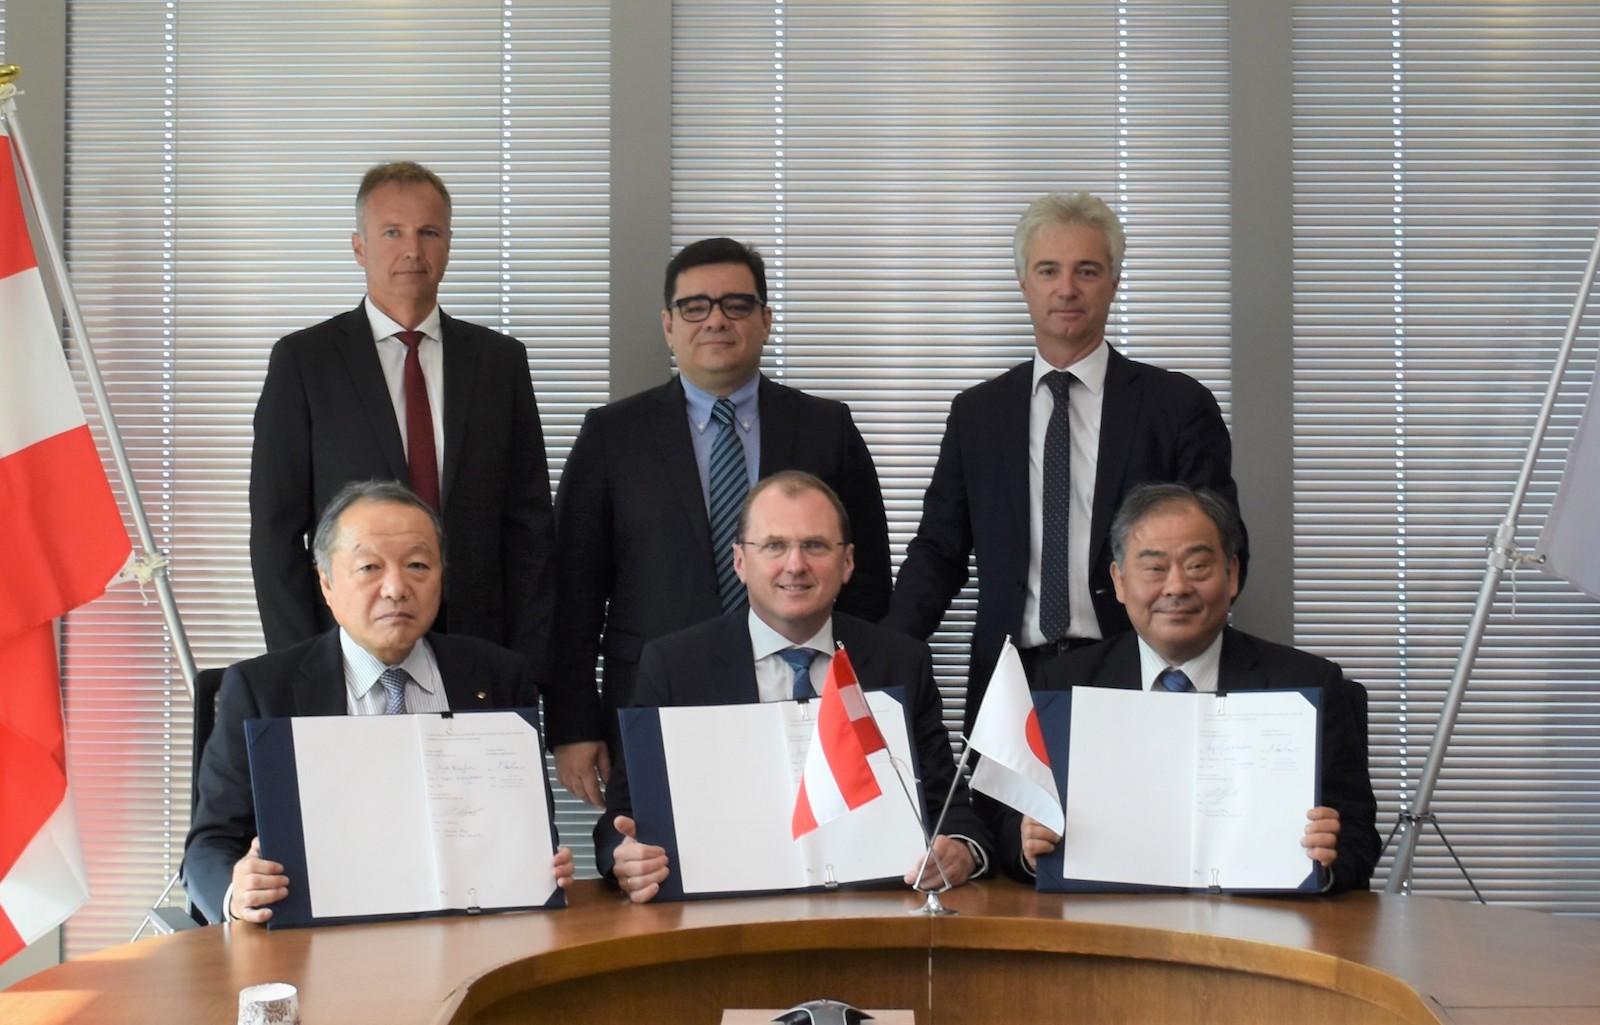 Signing of the sales cooperation agreement in Tokyo — Front row (L-R): Shinichi Kobayashi, managing executive officer and chief operating officer of the Metals & Mineral Resources Div. of Marubeni Corporation; Gerald Mayer, CEO of AMAG; and Akira Suzuki, executive officer of the Automotive Steel Products Div. of Marubeni Itochu Steel — Second row (L-R): Norbert Bürger, managing director of AMAG rolling Gmbh; Victor Breguncci, chief sales officer of AMAG; and Helmut Kaufmann, chief technology officer of AMAG. 